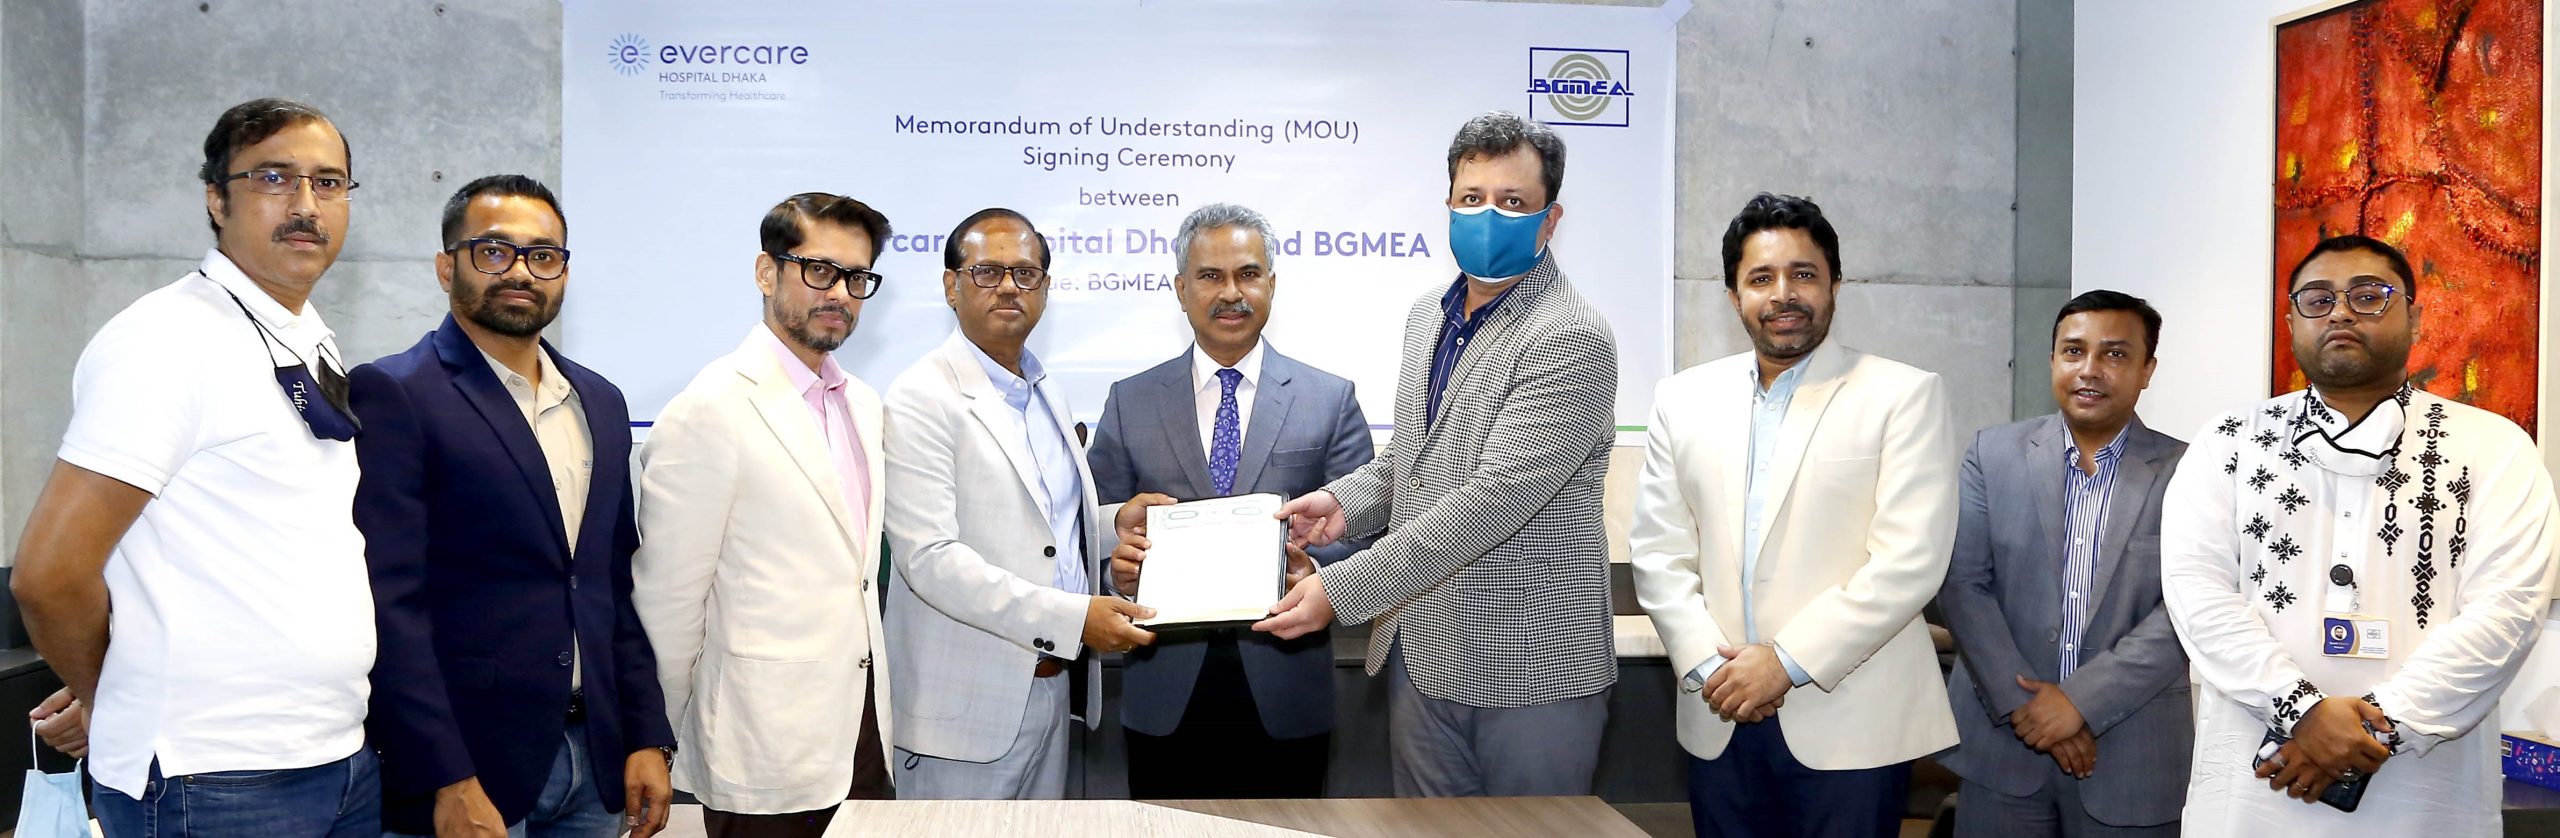 BGMEA and Evercare Sign Agreement on the BIG4 Initiative